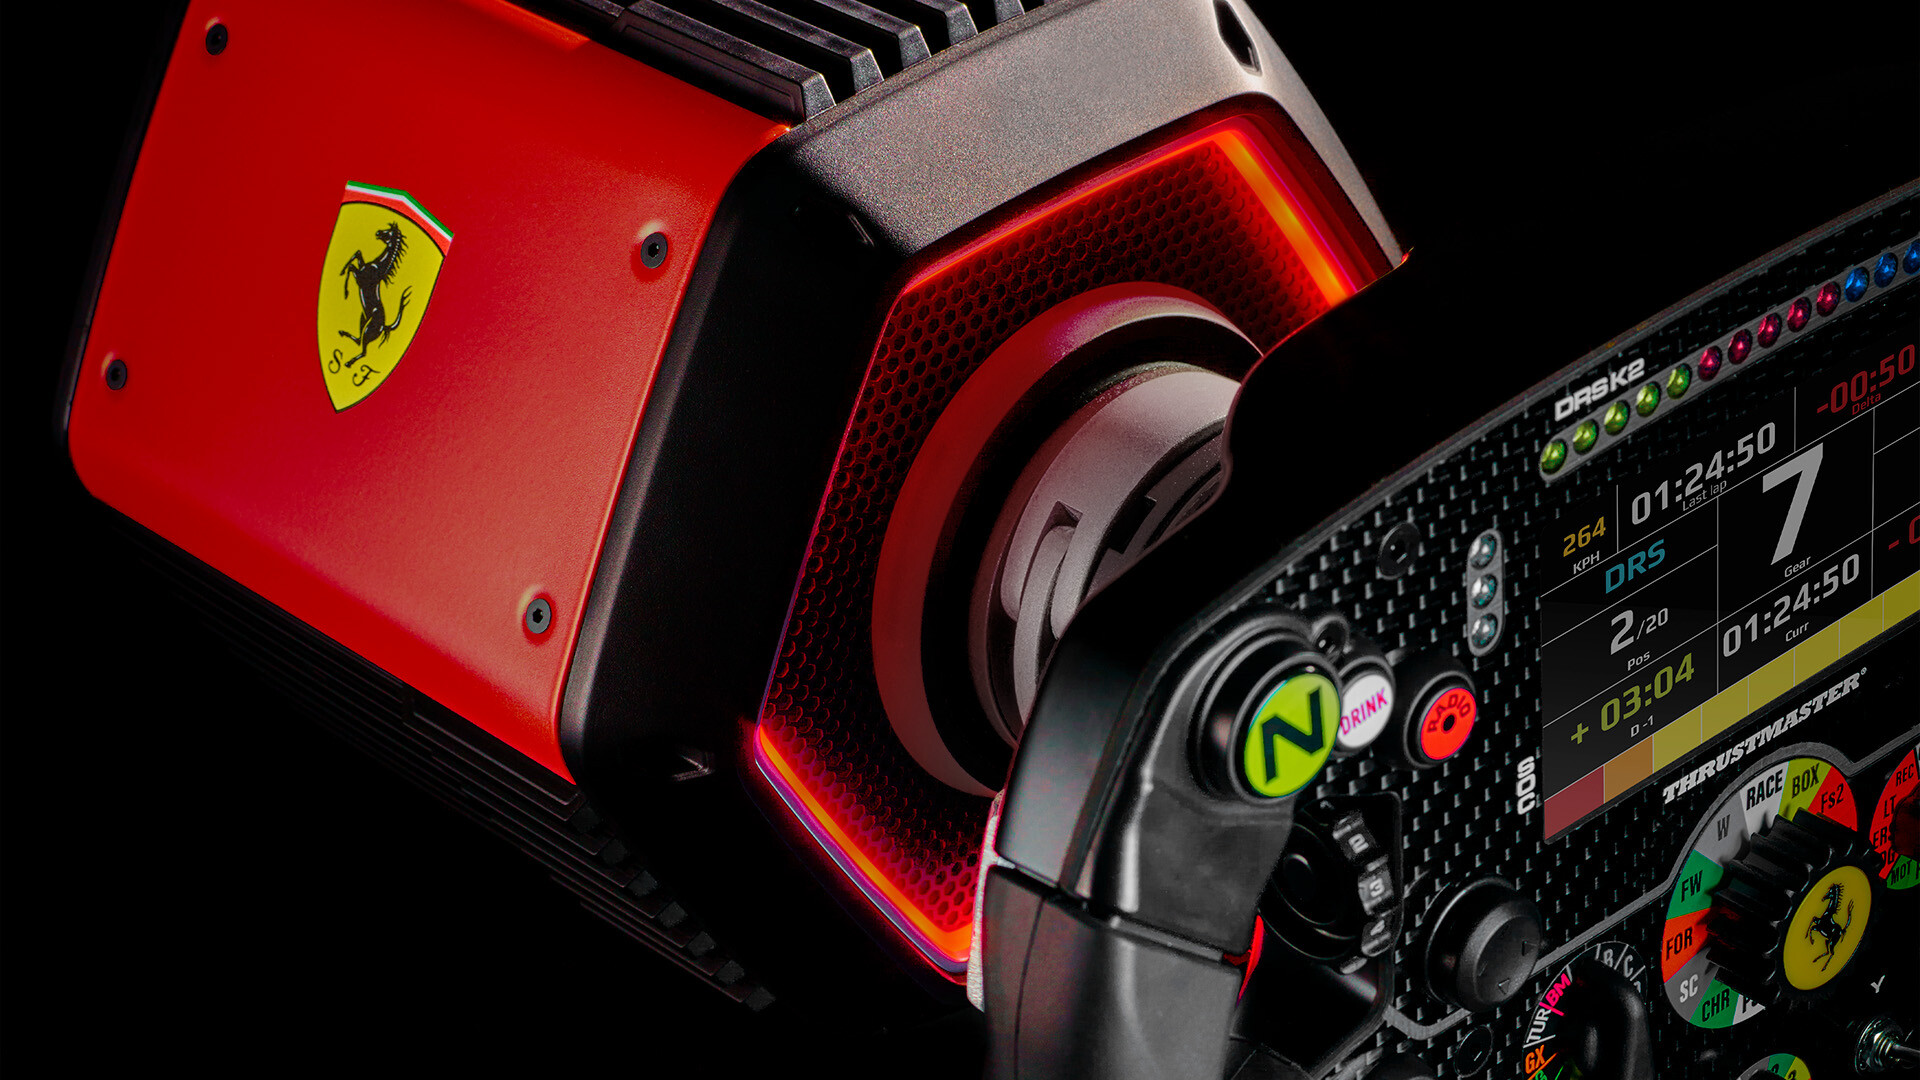 This summer, the Ultra-Premium Ferrari SF1000 Direct Drive Wheel Bundle will be launched by Thrustmaster.